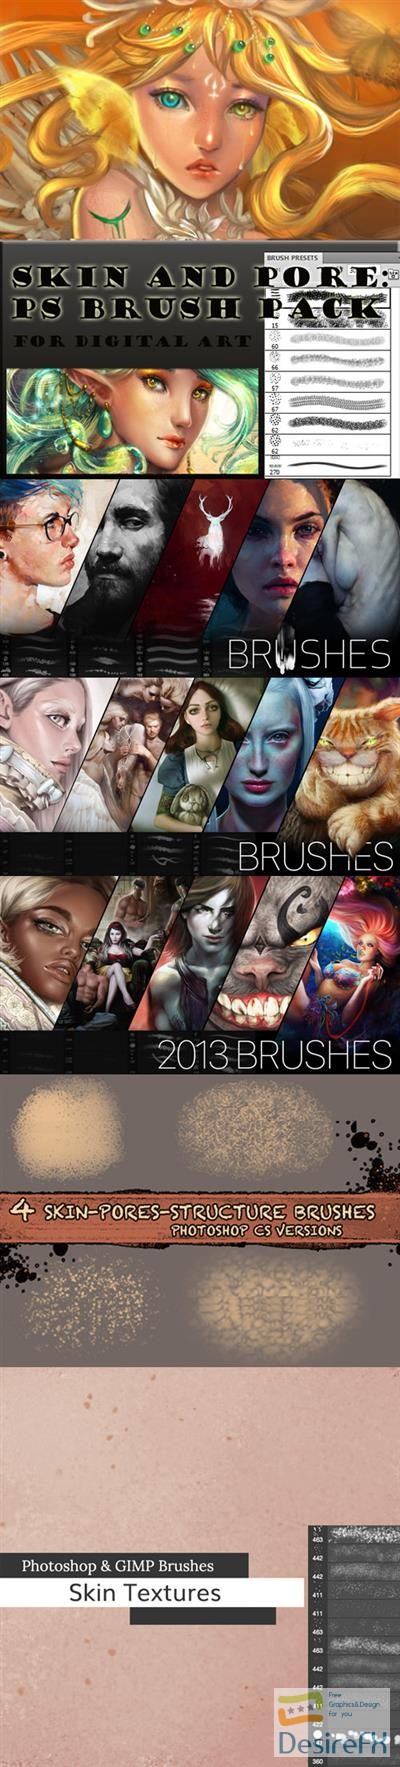 Skin Texture & Pore Brushes for Photoshop